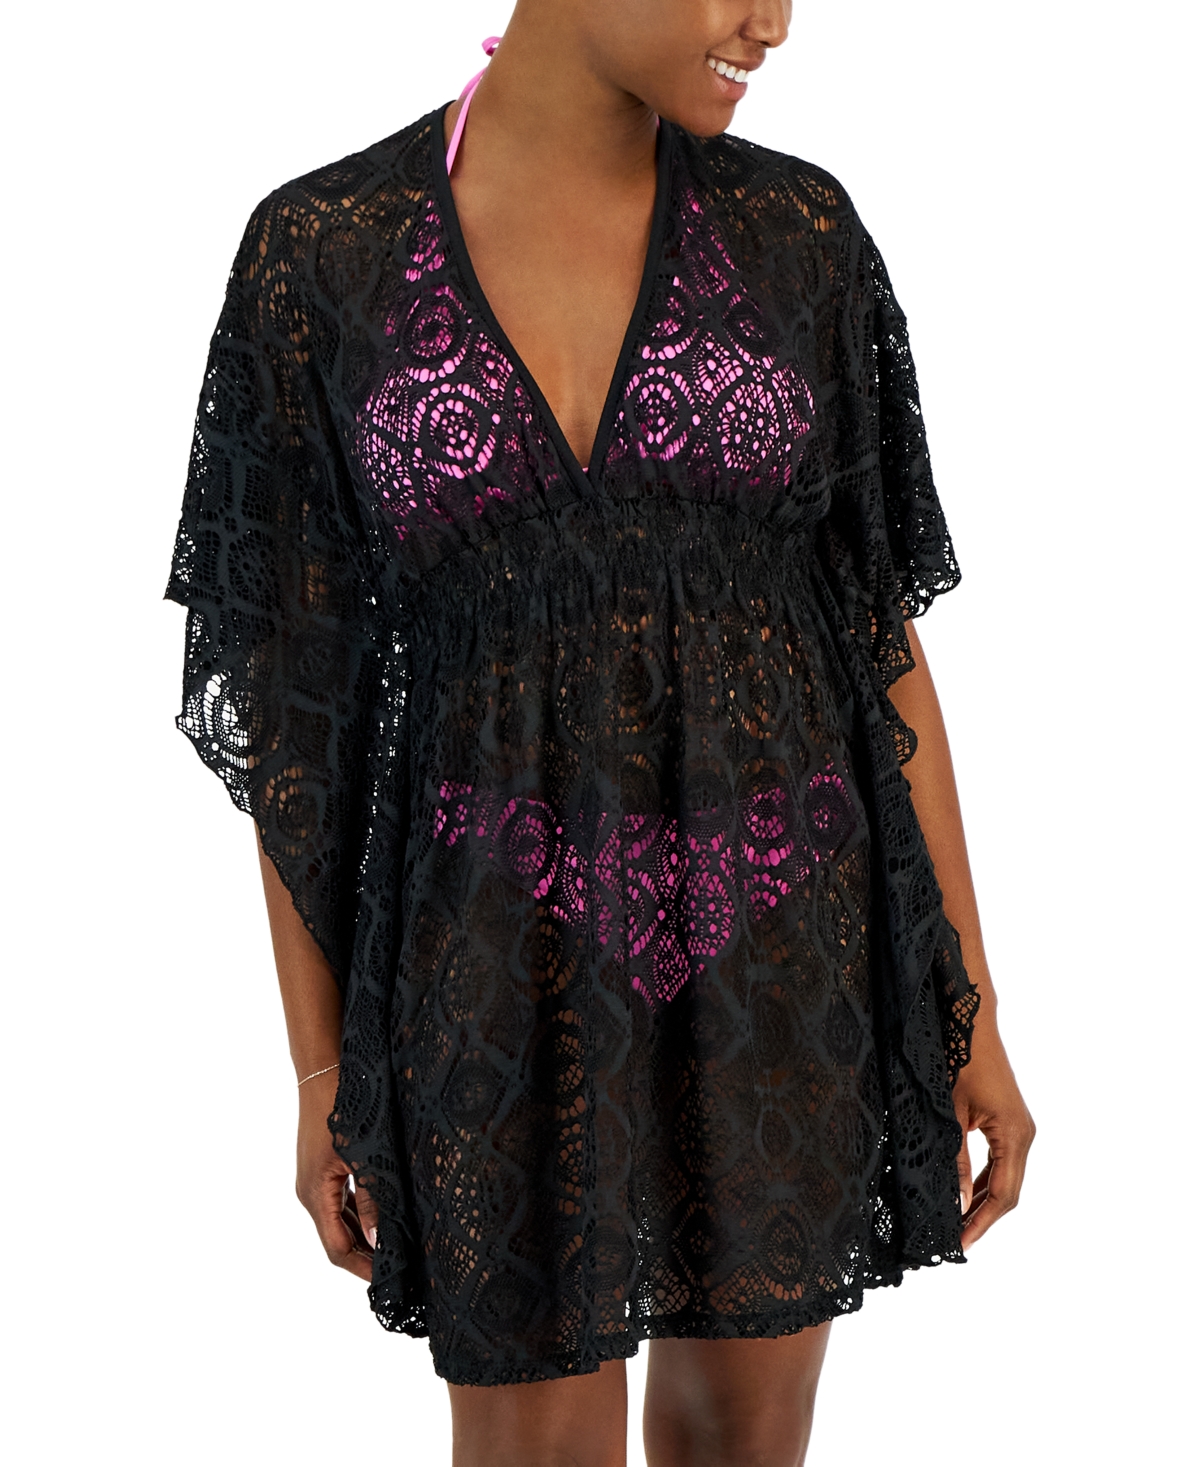 Women's Plunge-Neck Lace Kimono Cover-Up, Created for Macy's - Black